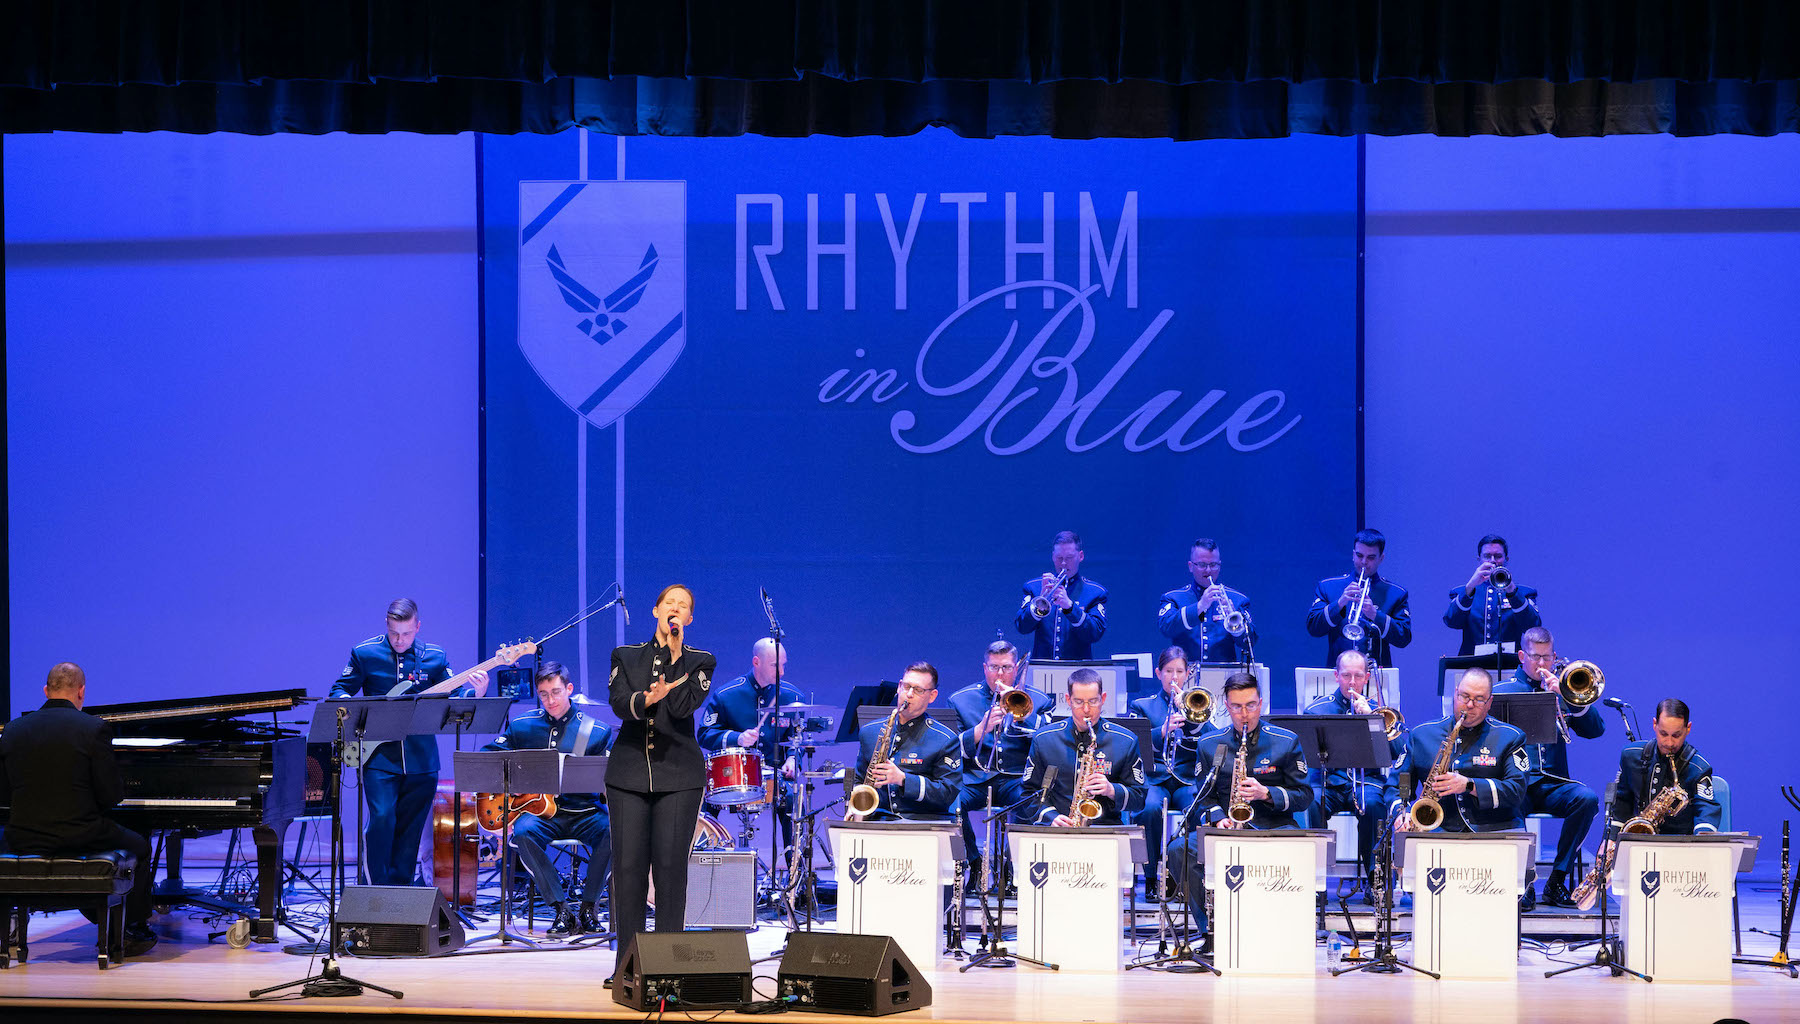 The 914th Air Refueling Wing will host a free concert from 5:30-7 p.m. Thursday, Aug. 24, at the air base. The United States Air Force Heritage of America Band will present Rhythm in Blue, the unit's dynamic jazz ensemble, as the featured performer. The concert celebrates the 75th anniversary of the Air Force Reserve and highlights the Western New York military. (Submitted photos courtesy of the Office of Public Affairs, 914th Air Refueling Wing)